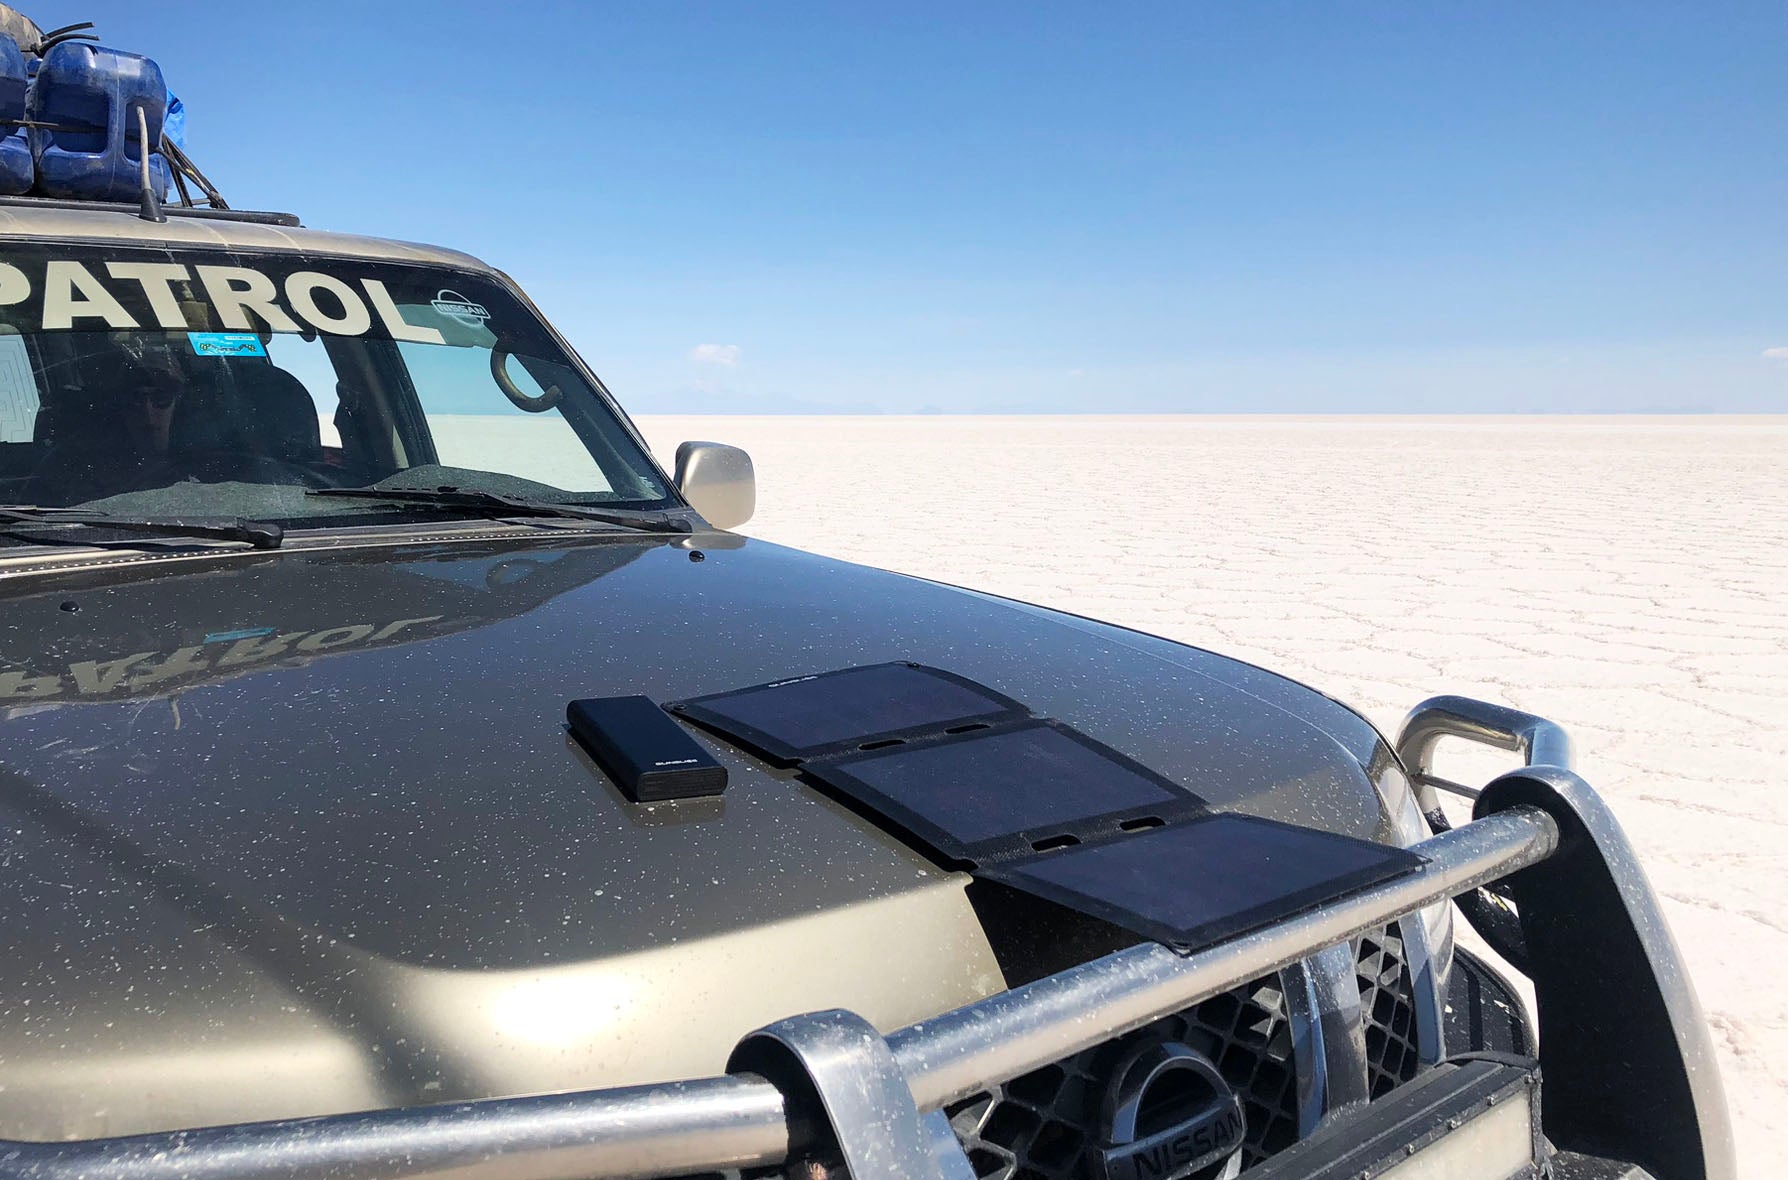 Portable solar panel (Fusion flex 18) and power bank (gravity 100) on a car in the desert 